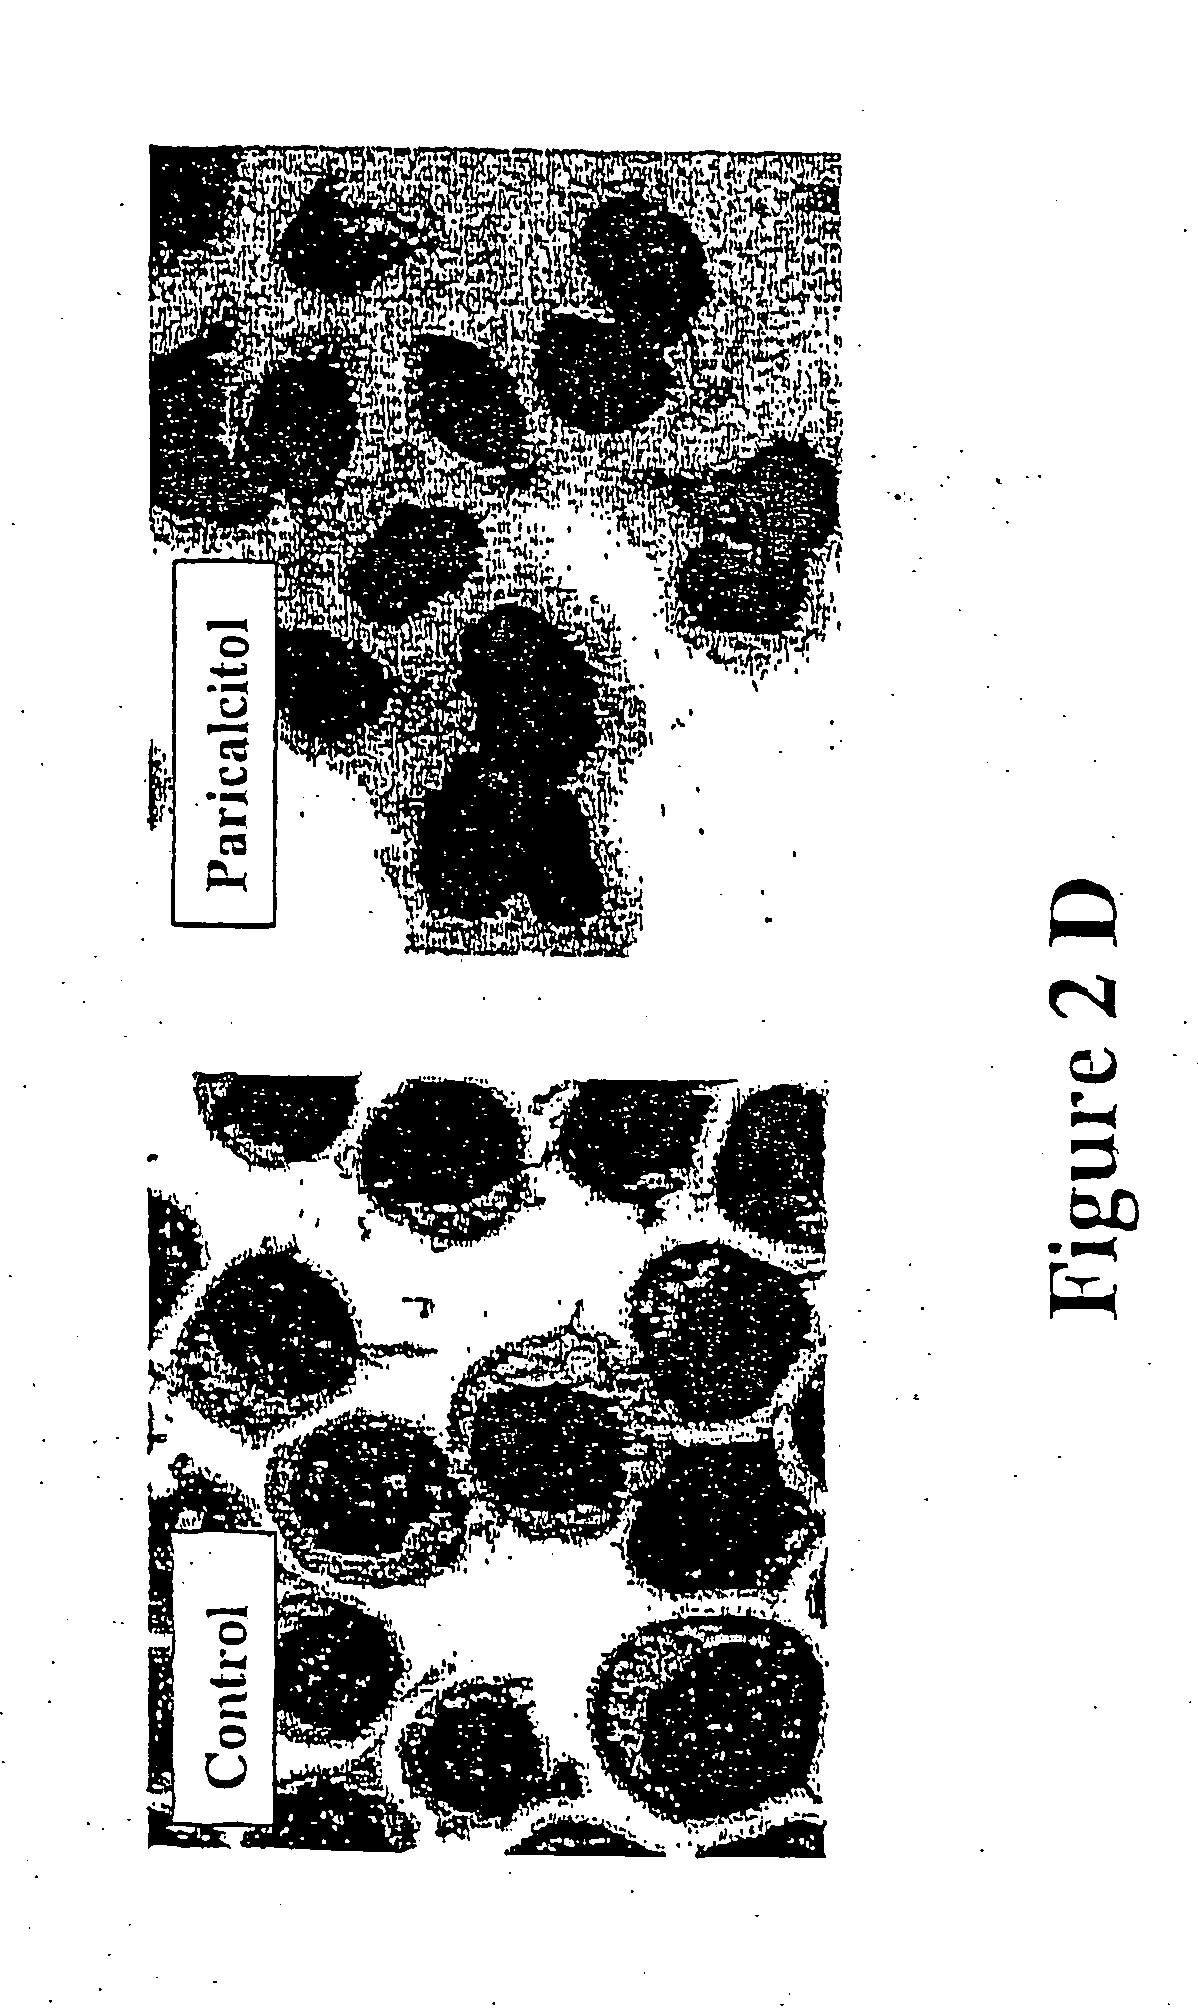 Paricalcitol as a chemotherapeutic agent